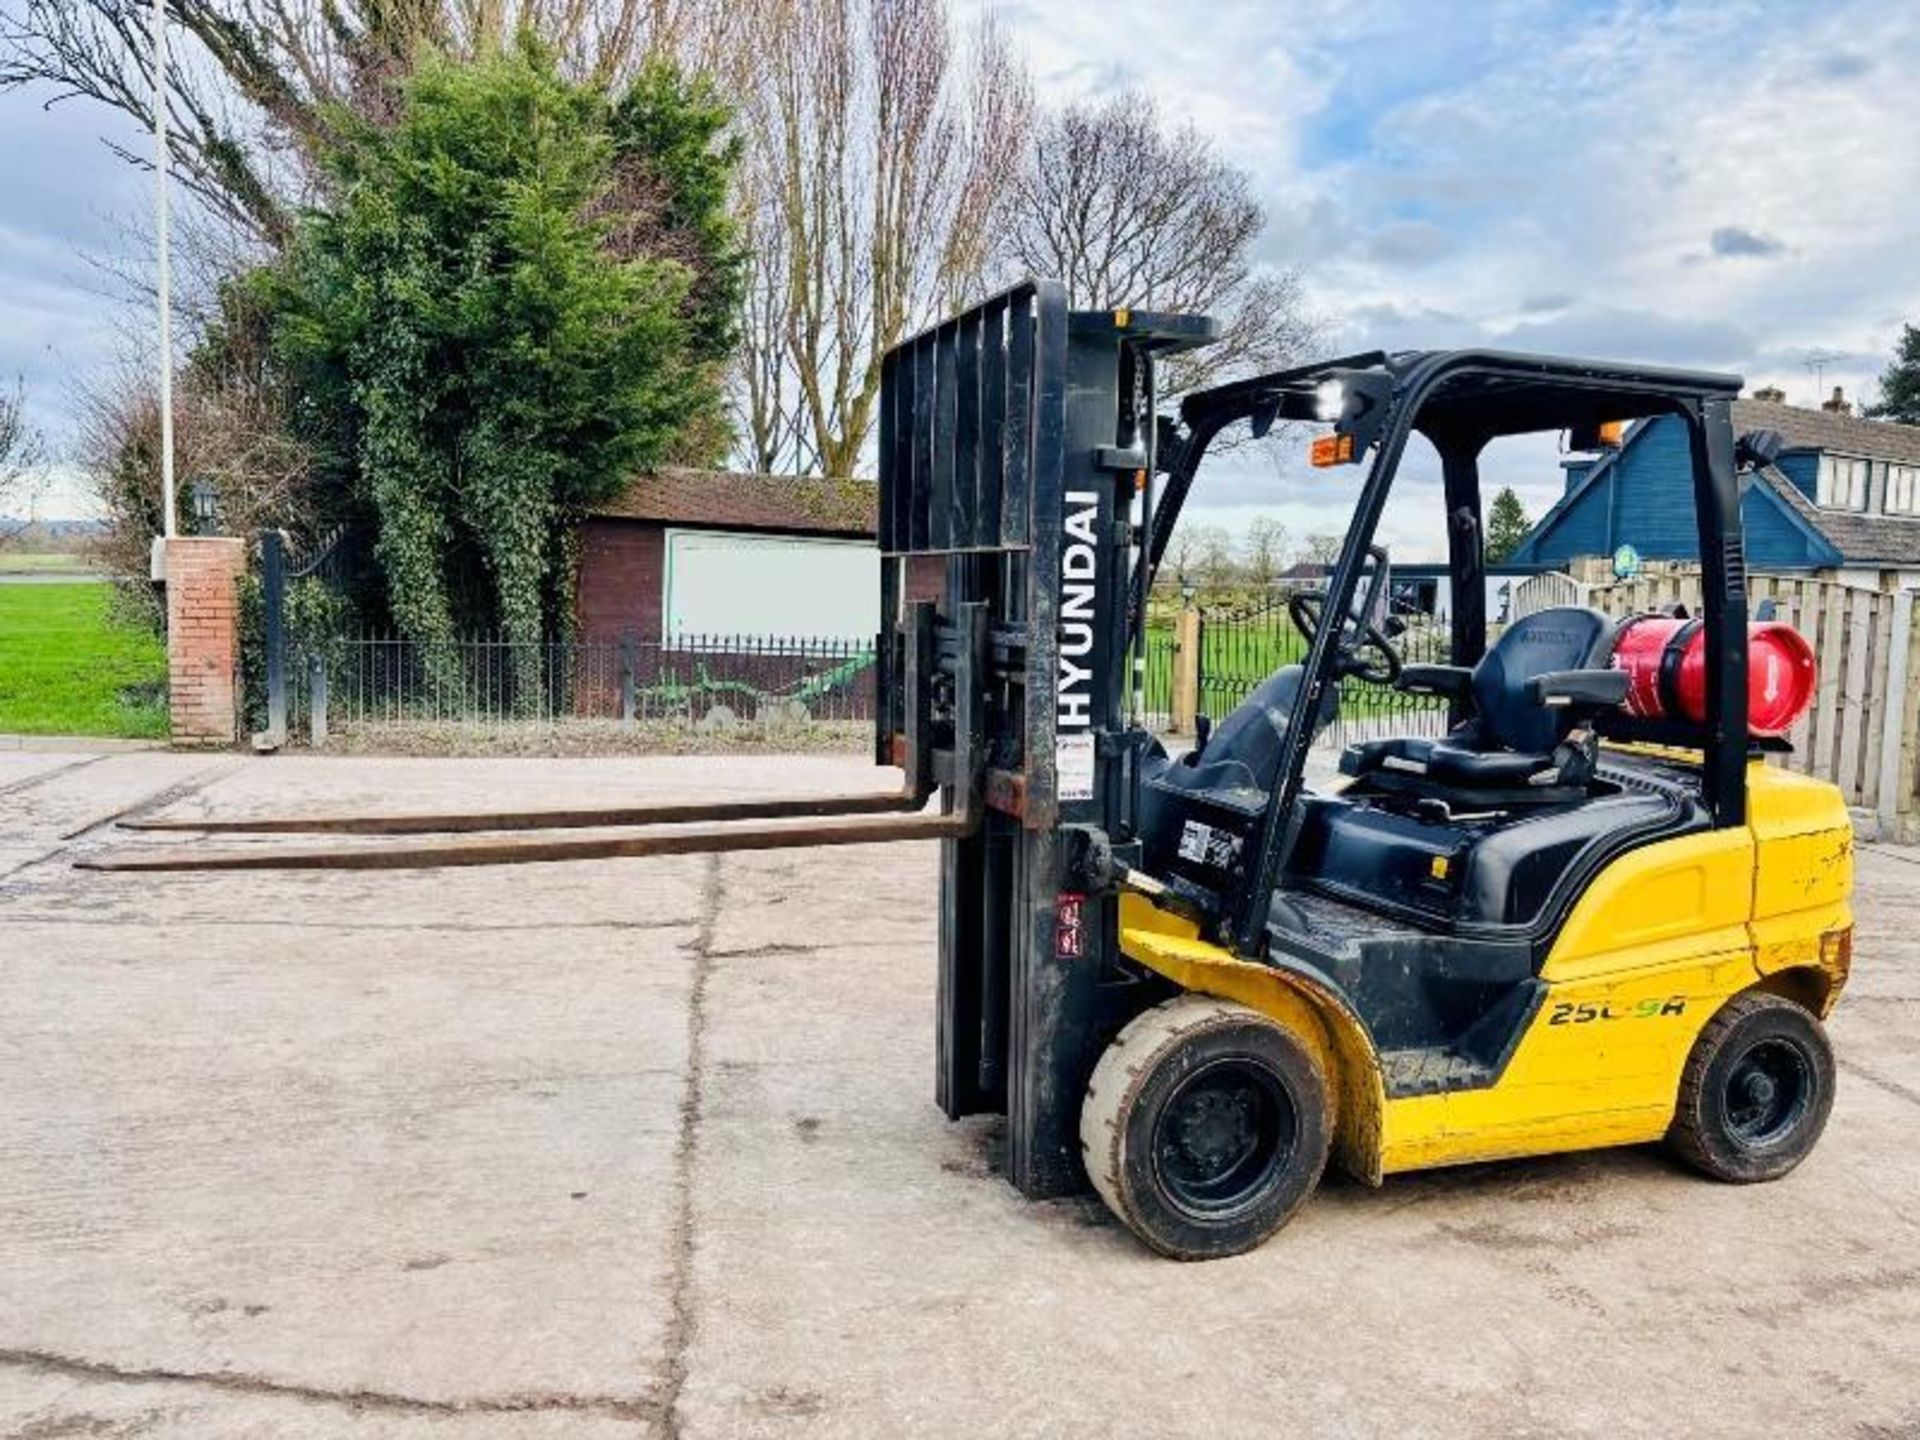 HYUNDAI 25L-9A CONTAINER SPEC FORKLIFT *YEAR 2017, 4463 HOURS* C/W PALLET TINES - Image 17 of 18